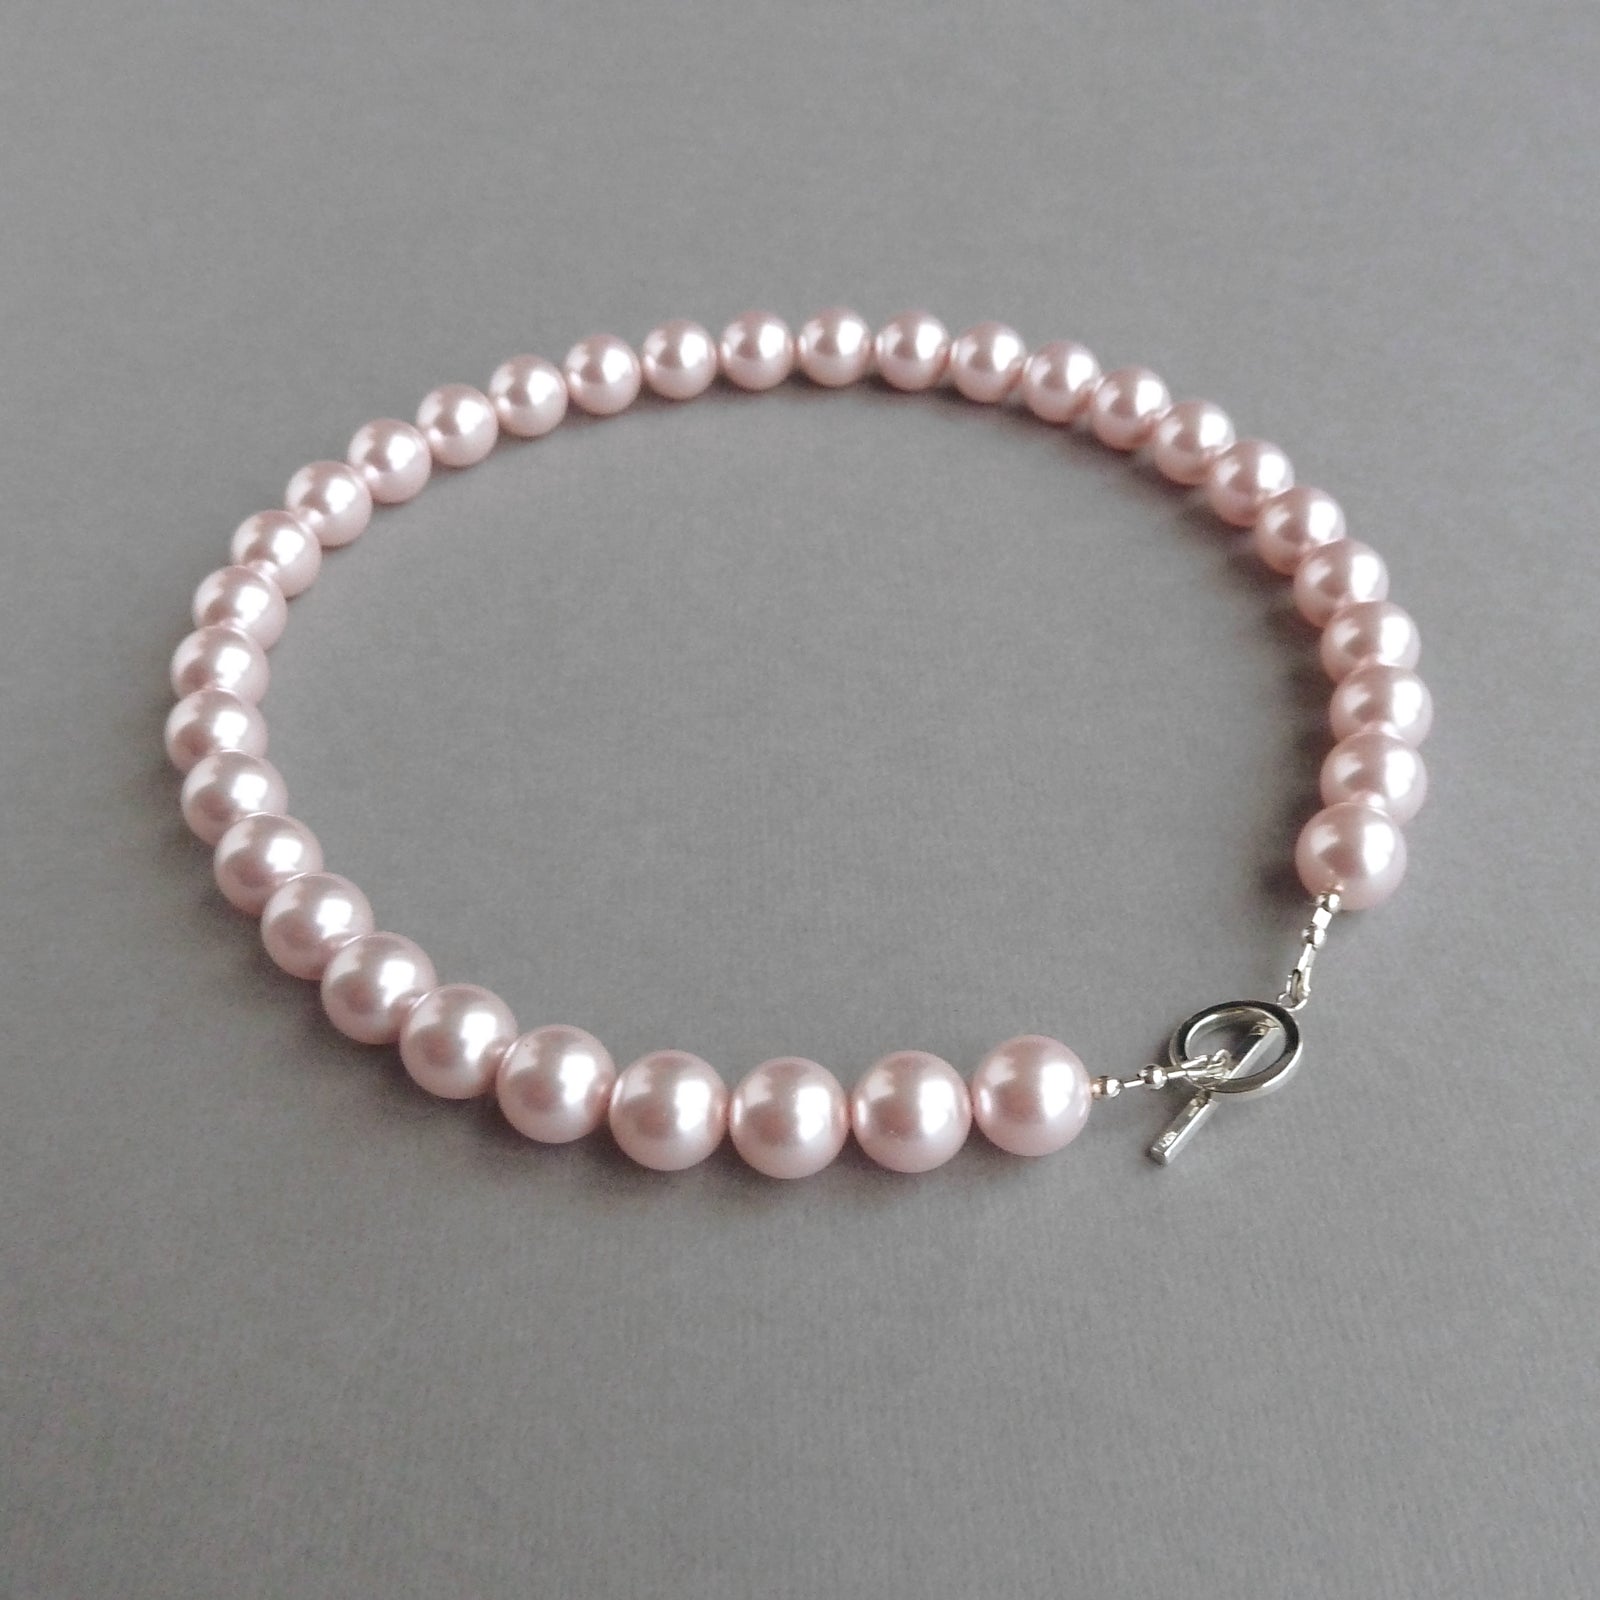 Chunky pastel pink pearl necklace for women